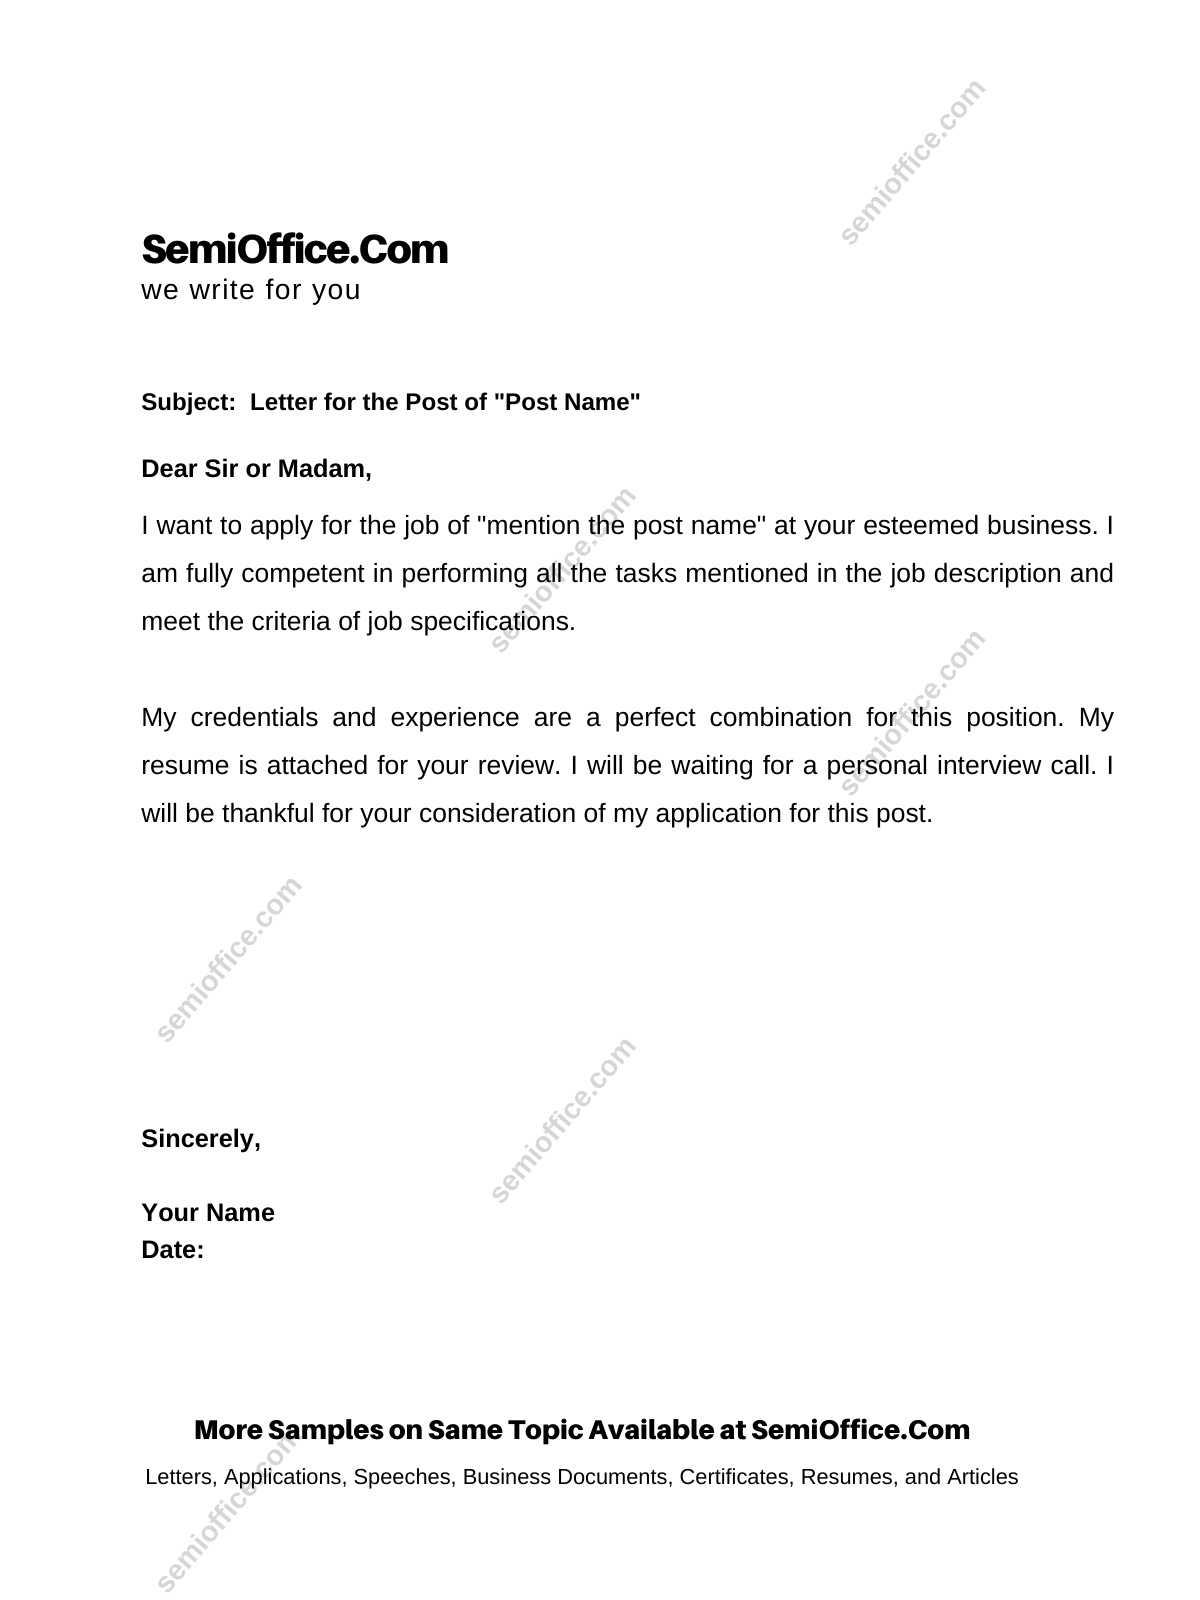 cover-letter-for-job-free-templates-semioffice-com